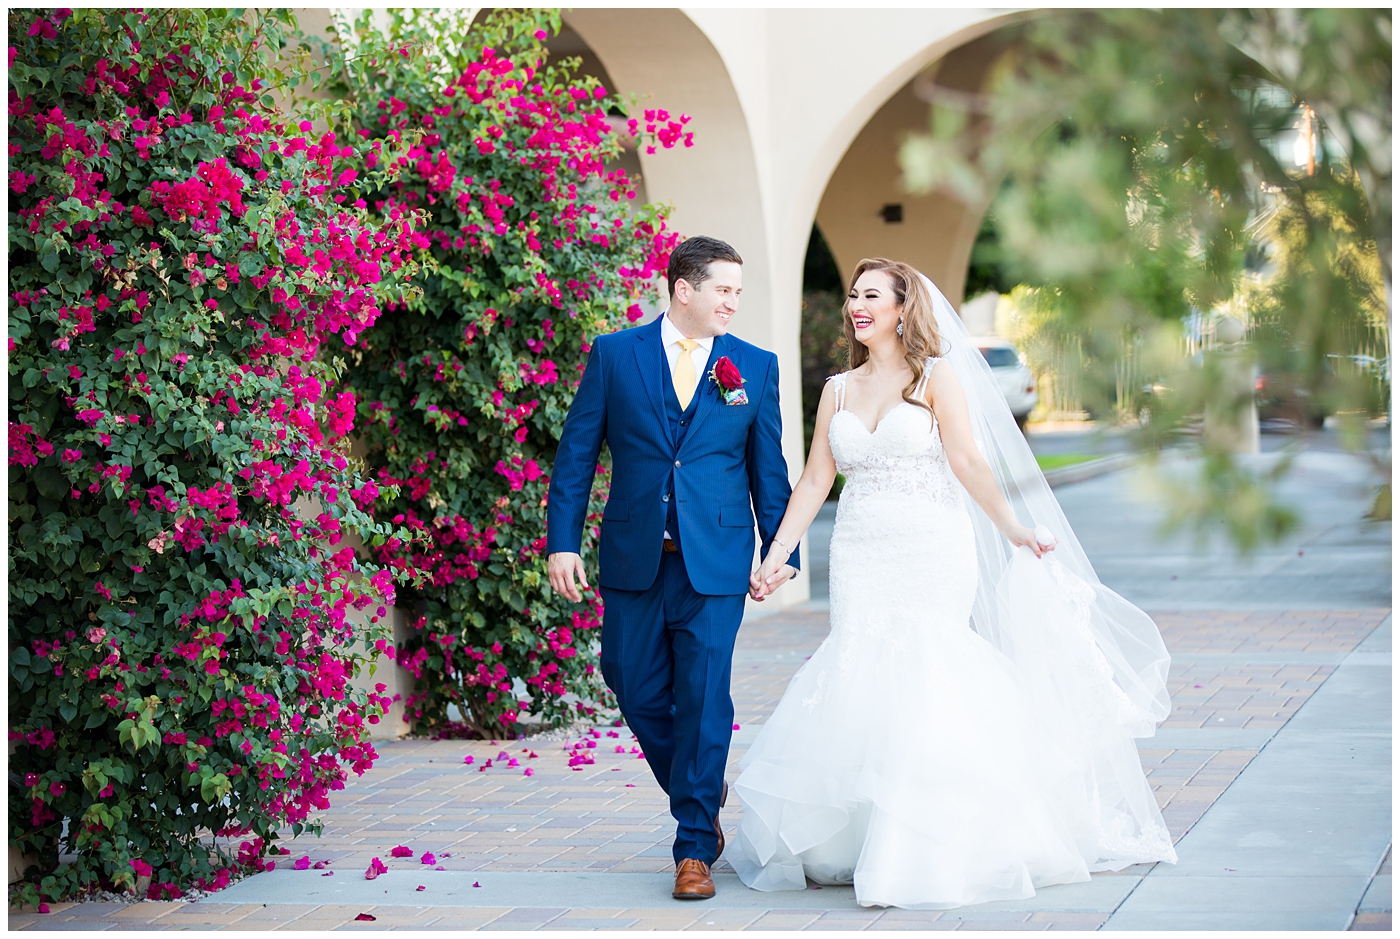 groom in blue suit with yellow tie and red rose boutonniere and bride in morilee wedding dress with red and white rose bouquet portrait